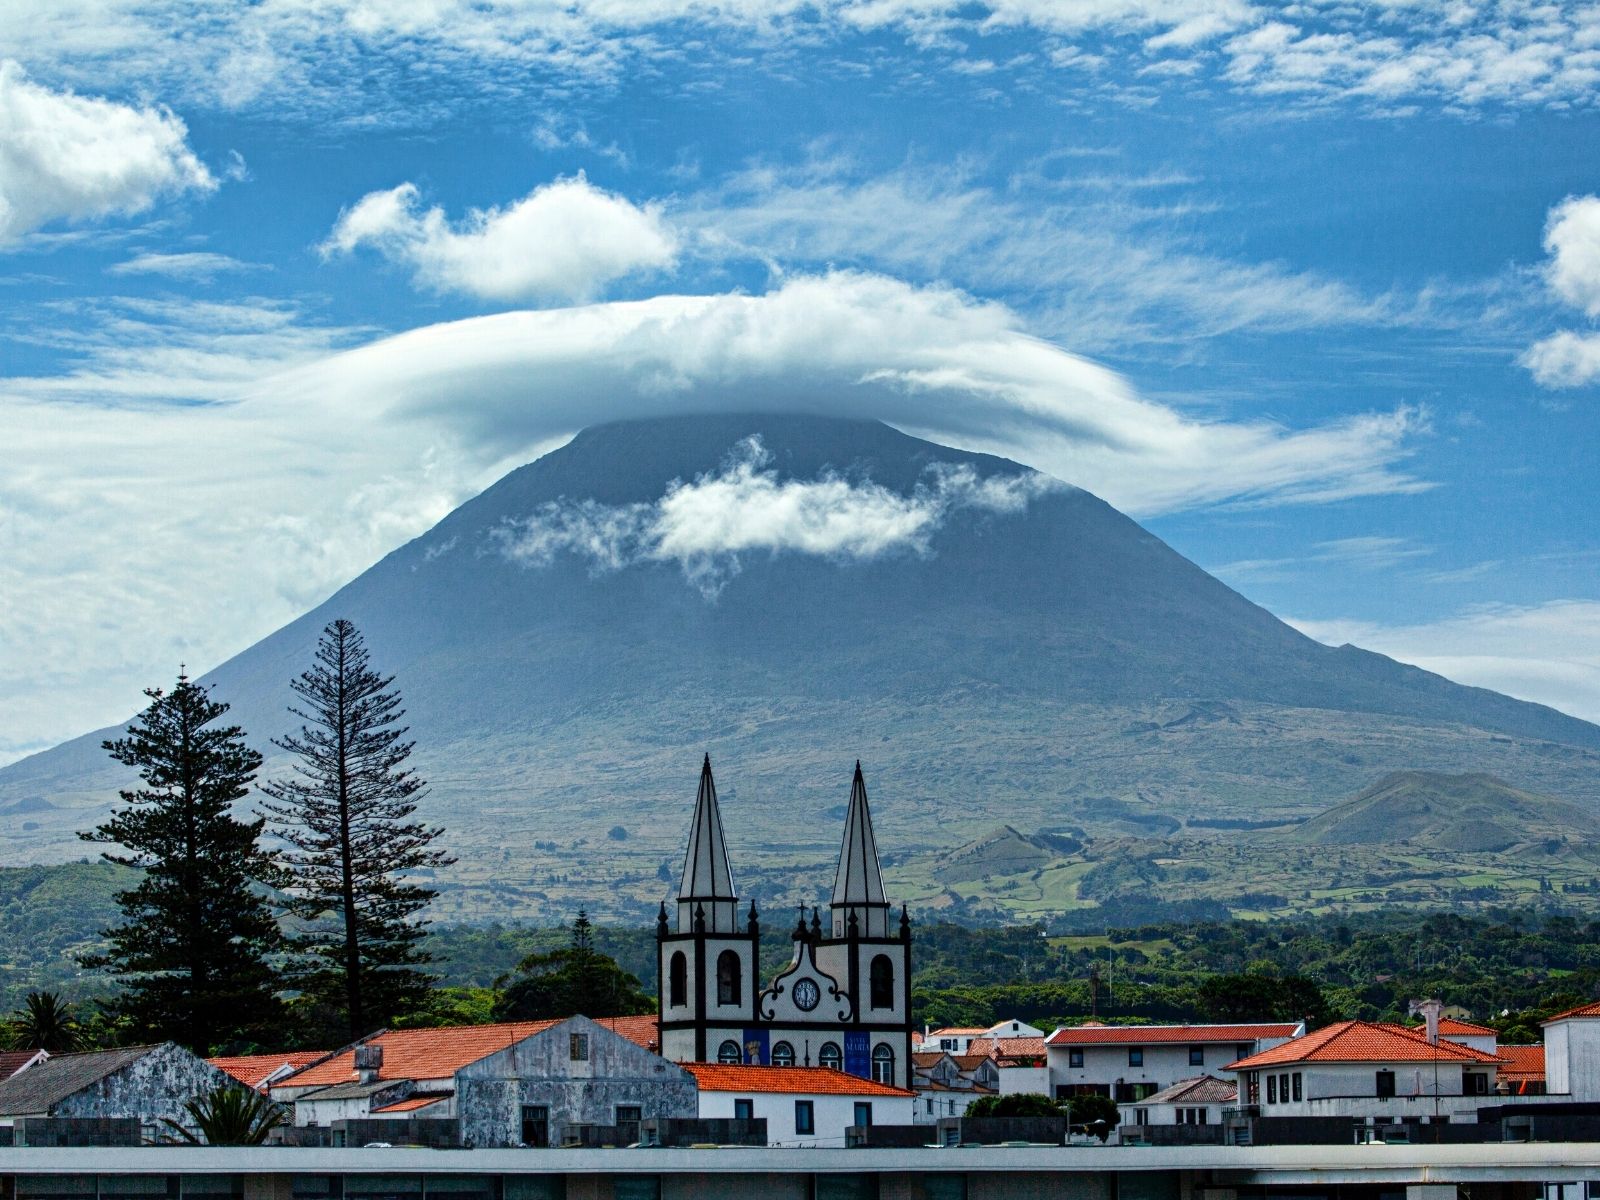 pico island town with volcano in background